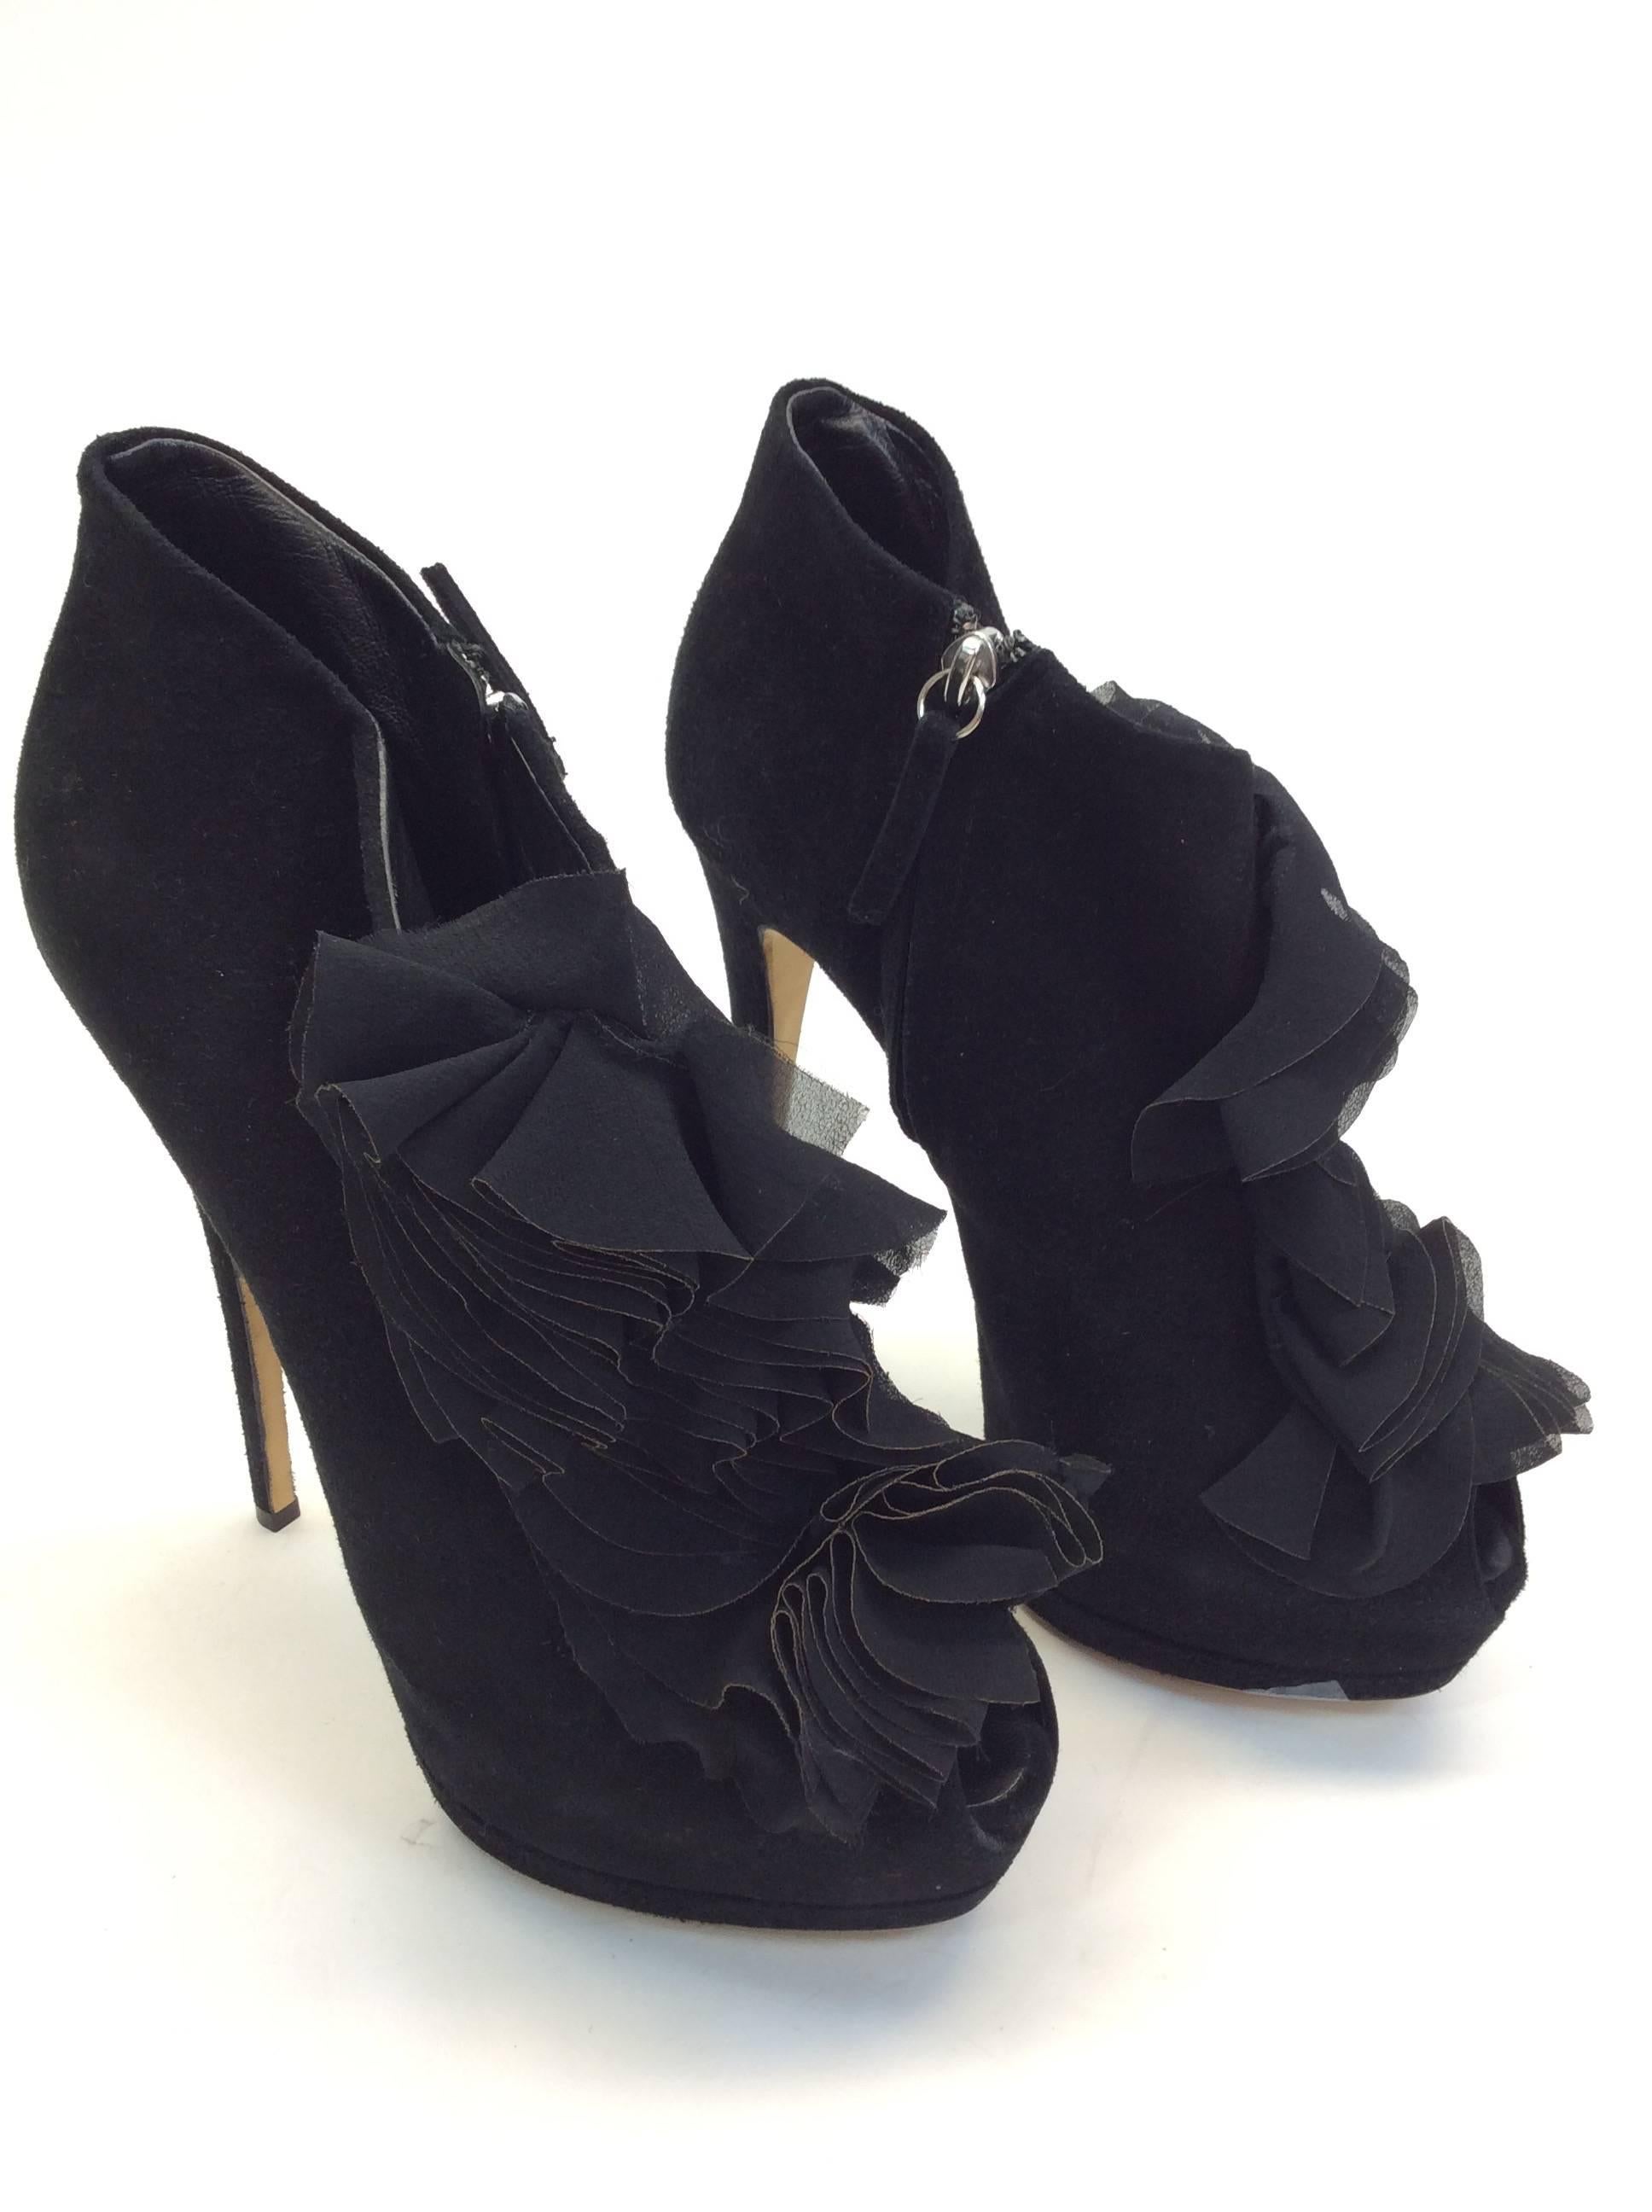 Giuseppe Zanotti Black Suede Ruffle High Heels In Excellent Condition For Sale In Narberth, PA